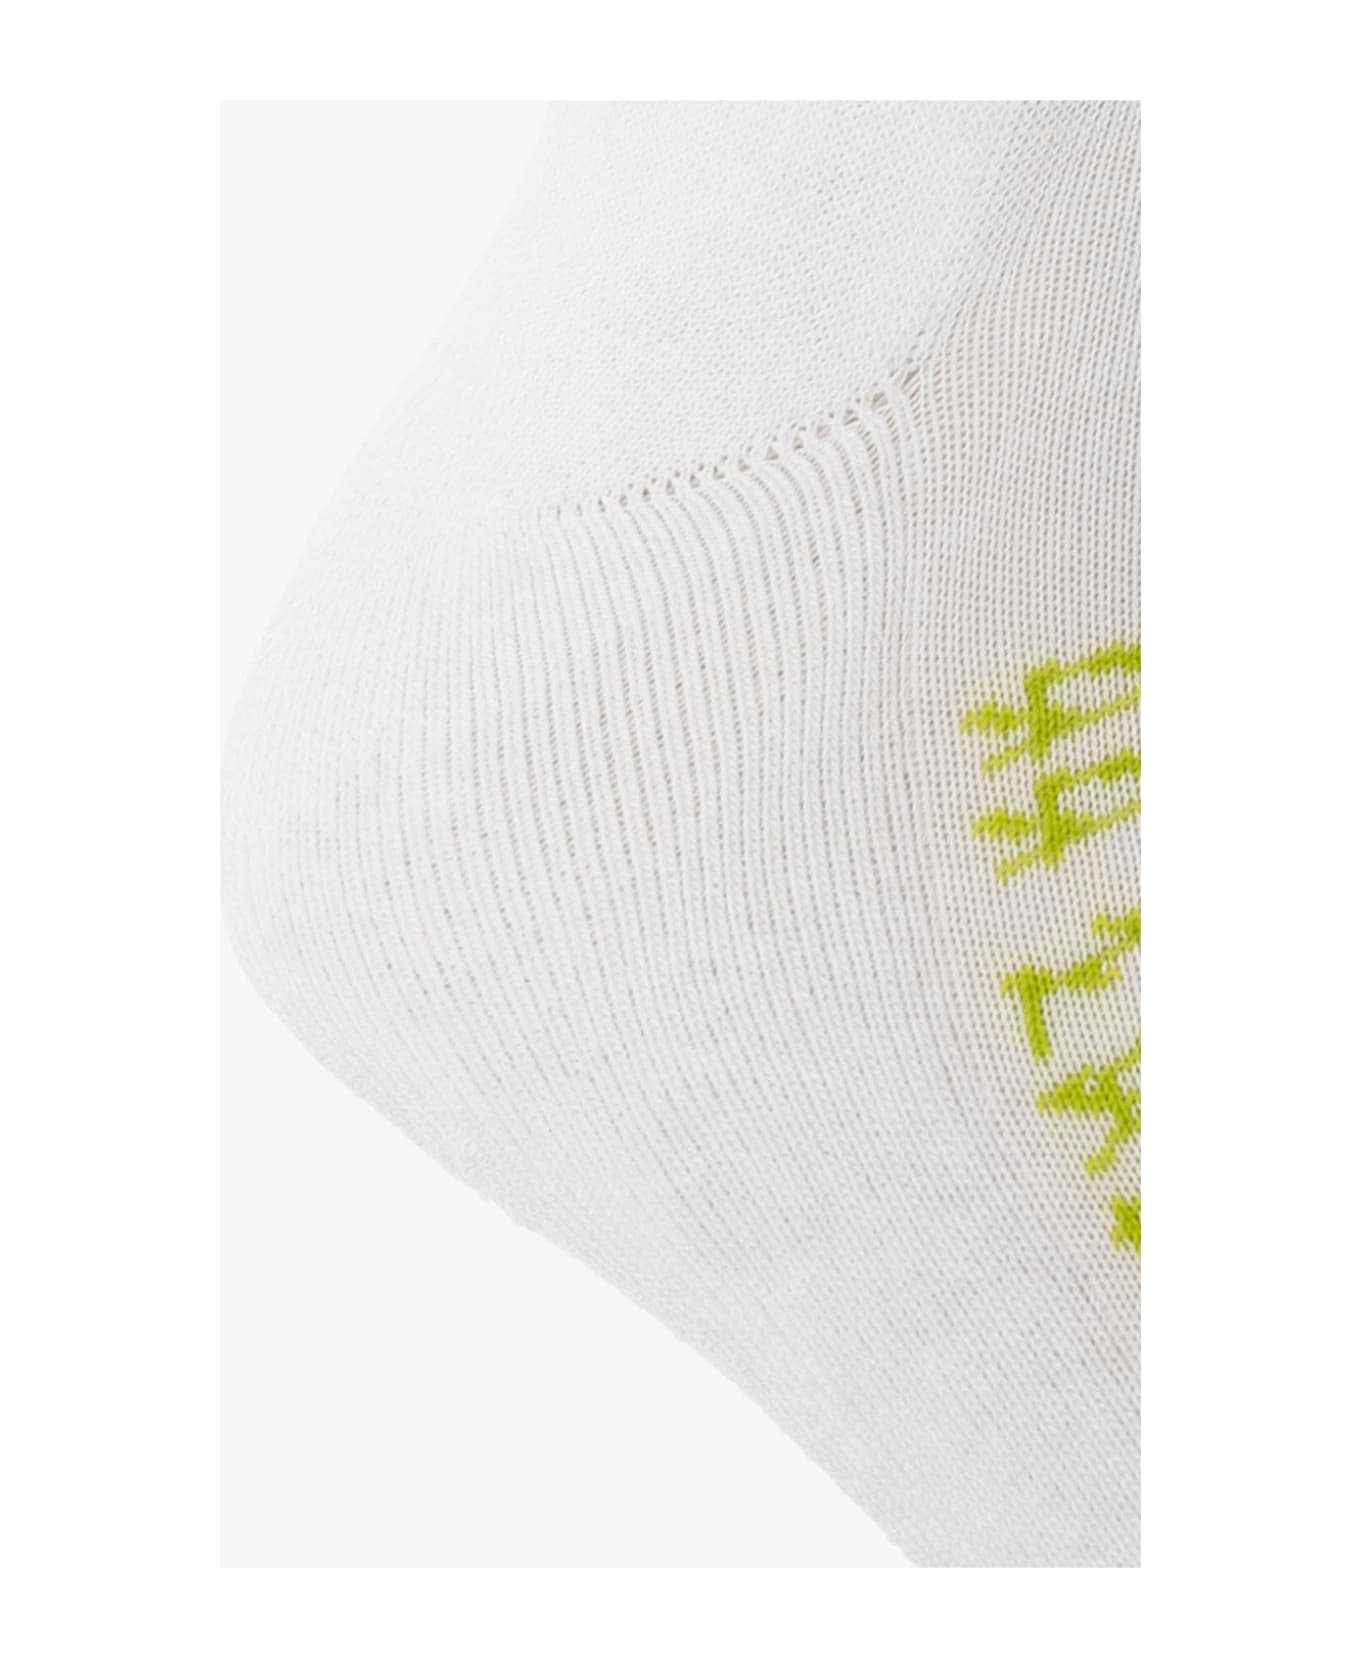 44 Label Group Socks With Logo